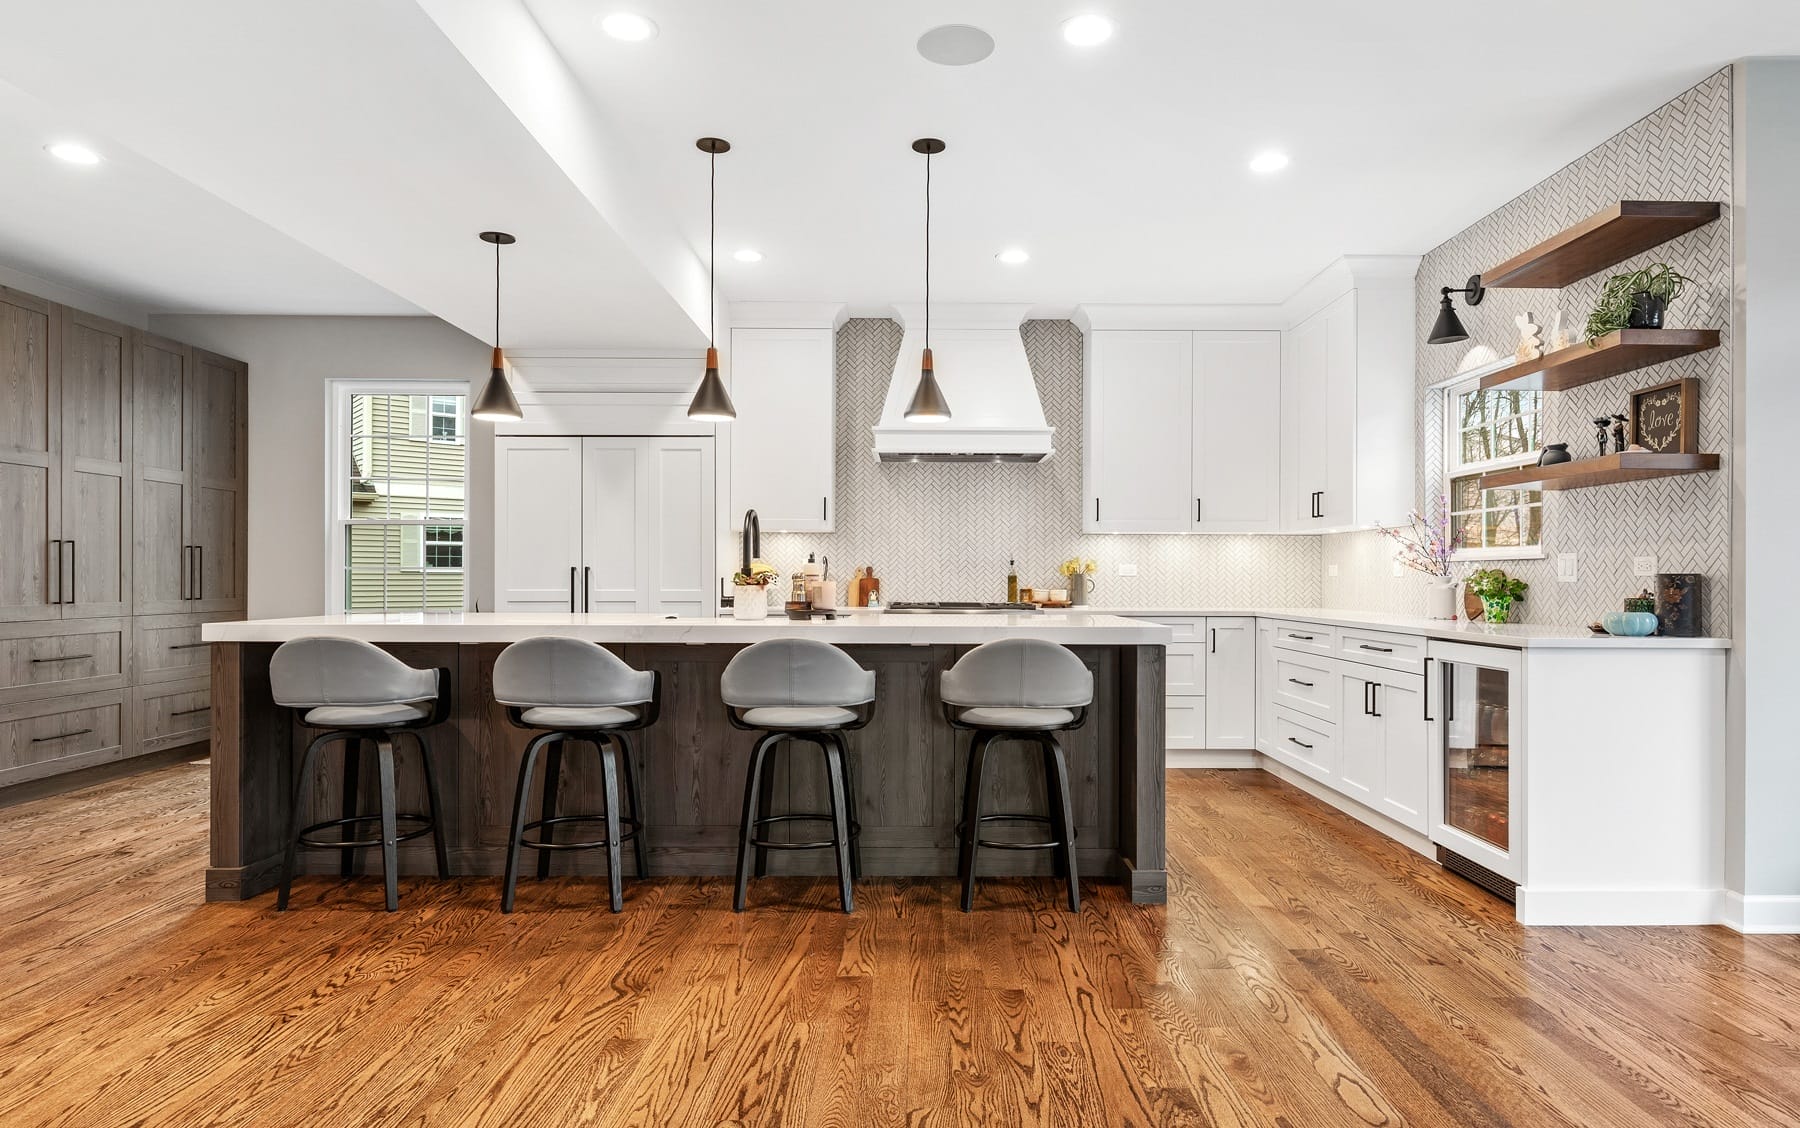 Transitional Entertaining Kitchen with Integrated Island Seating